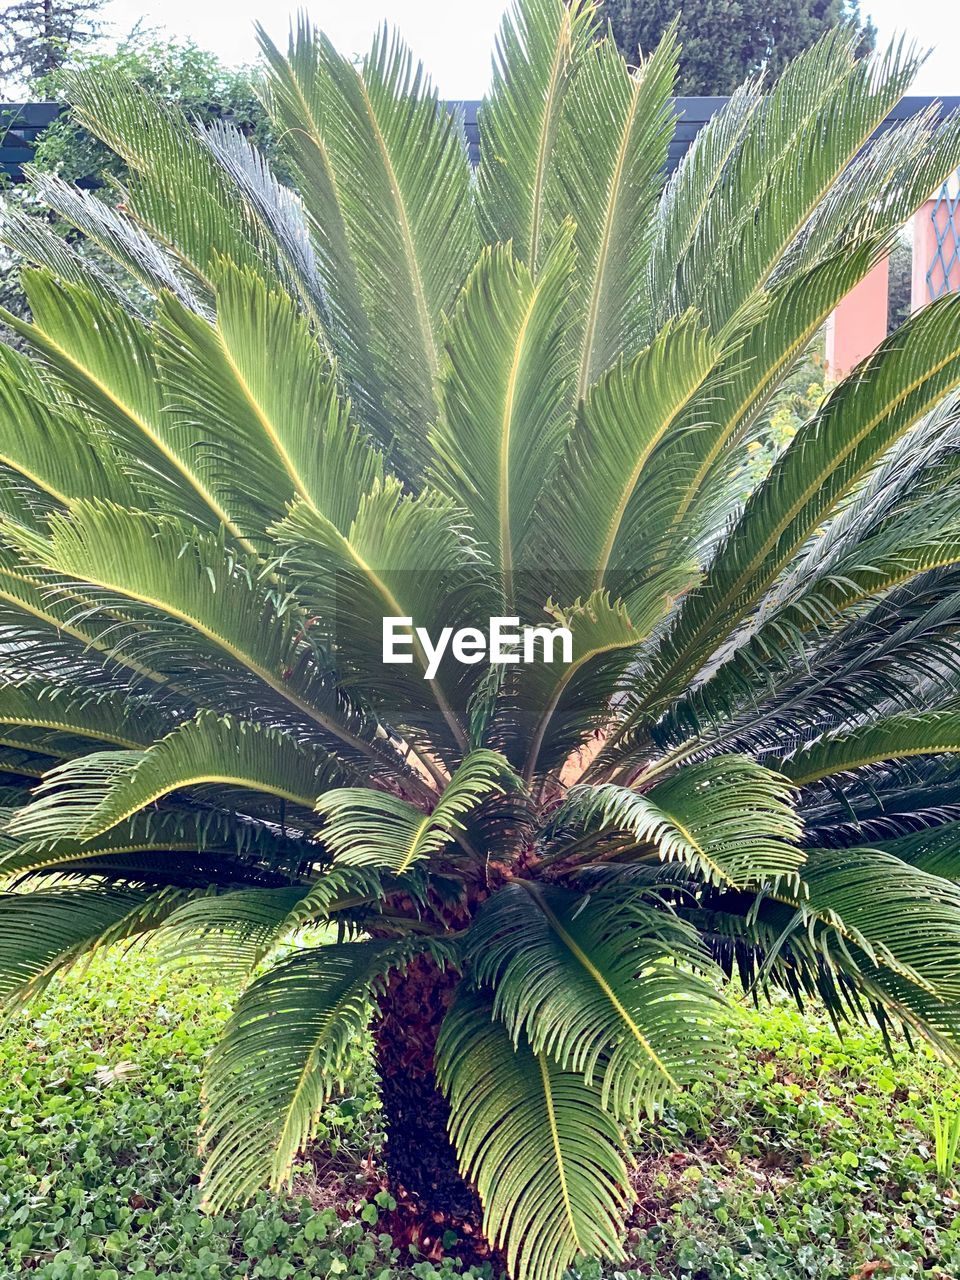 CLOSE-UP OF PALM TREE GROWING IN FIELD